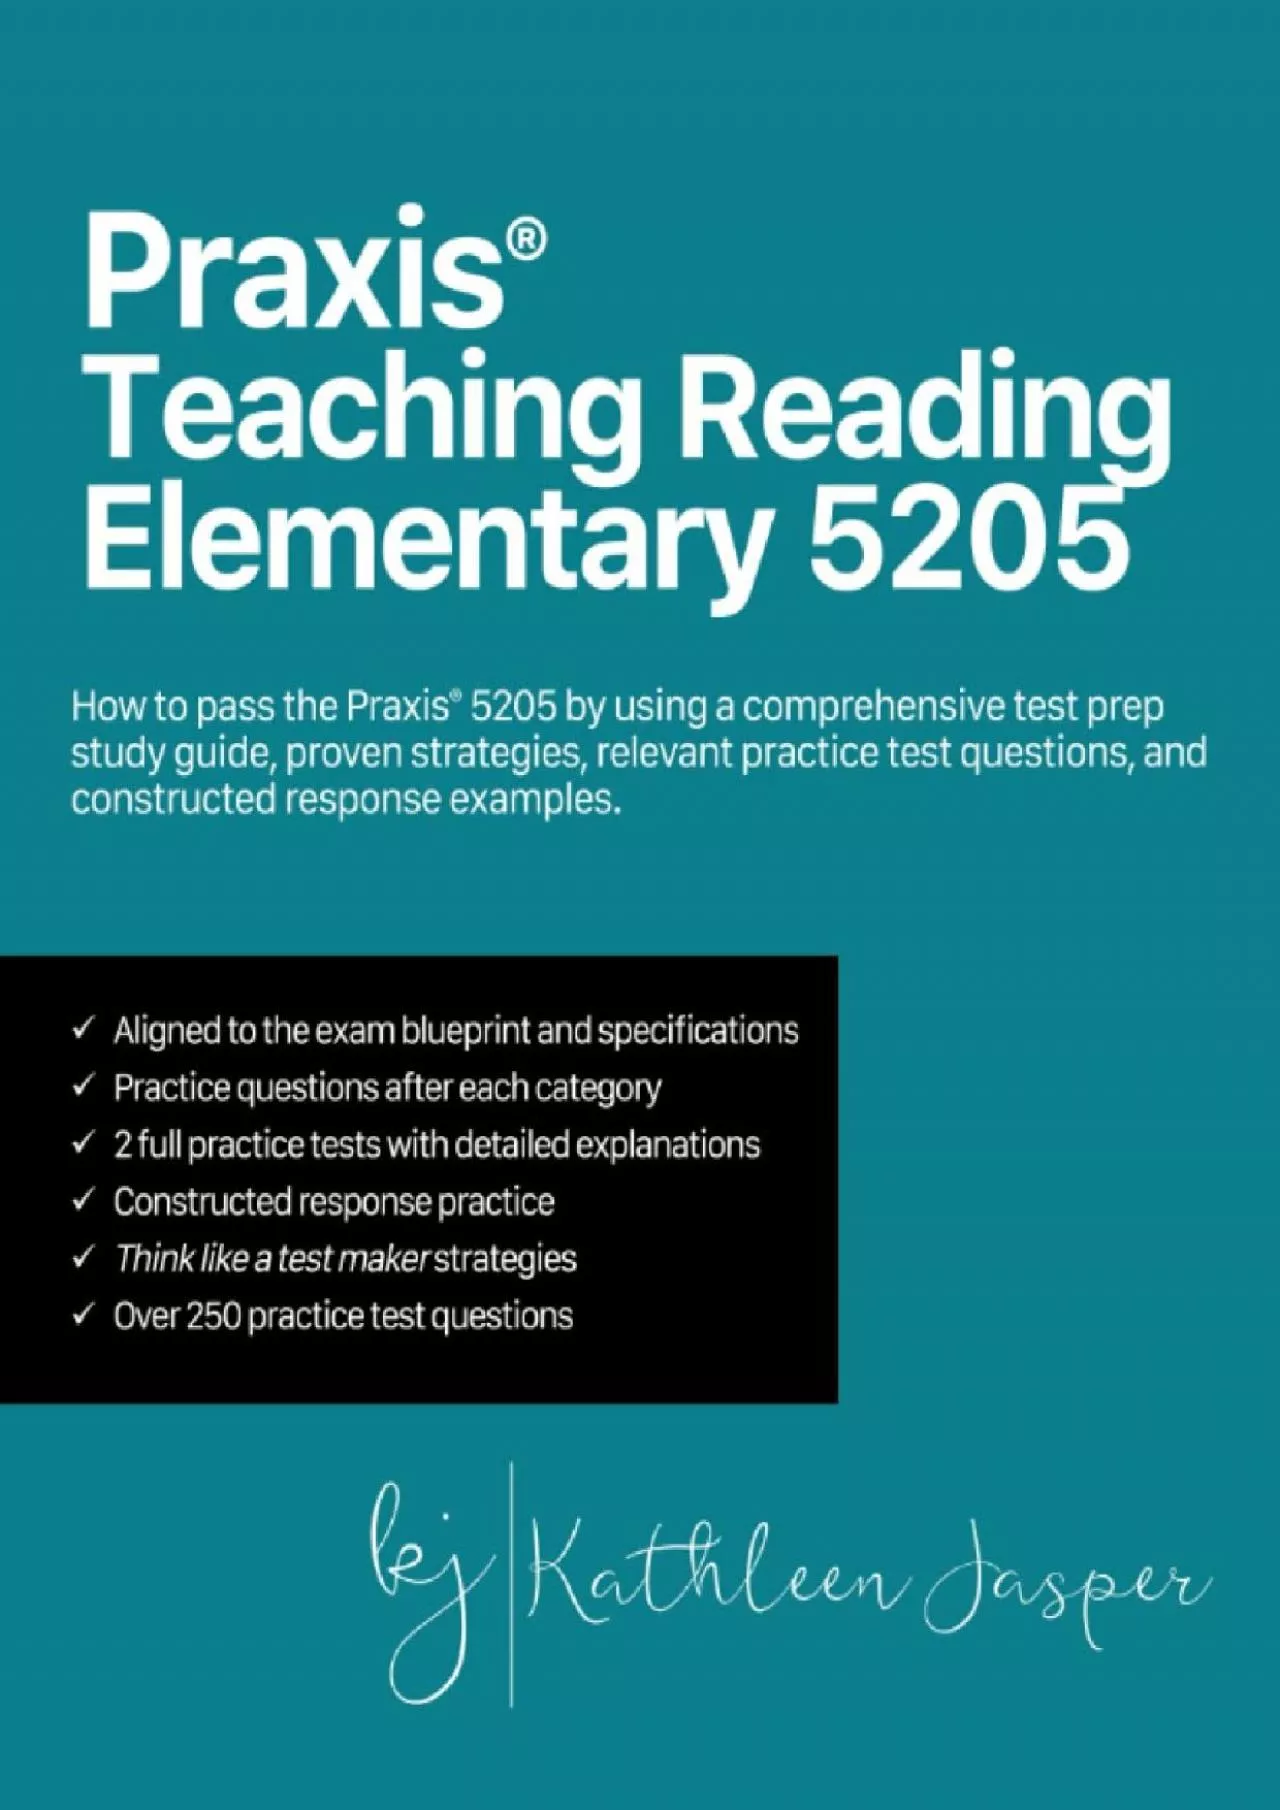 [DOWNLOAD] Praxis® Teaching Reading Elementary 5205: How to pass the Praxis® 5205 by